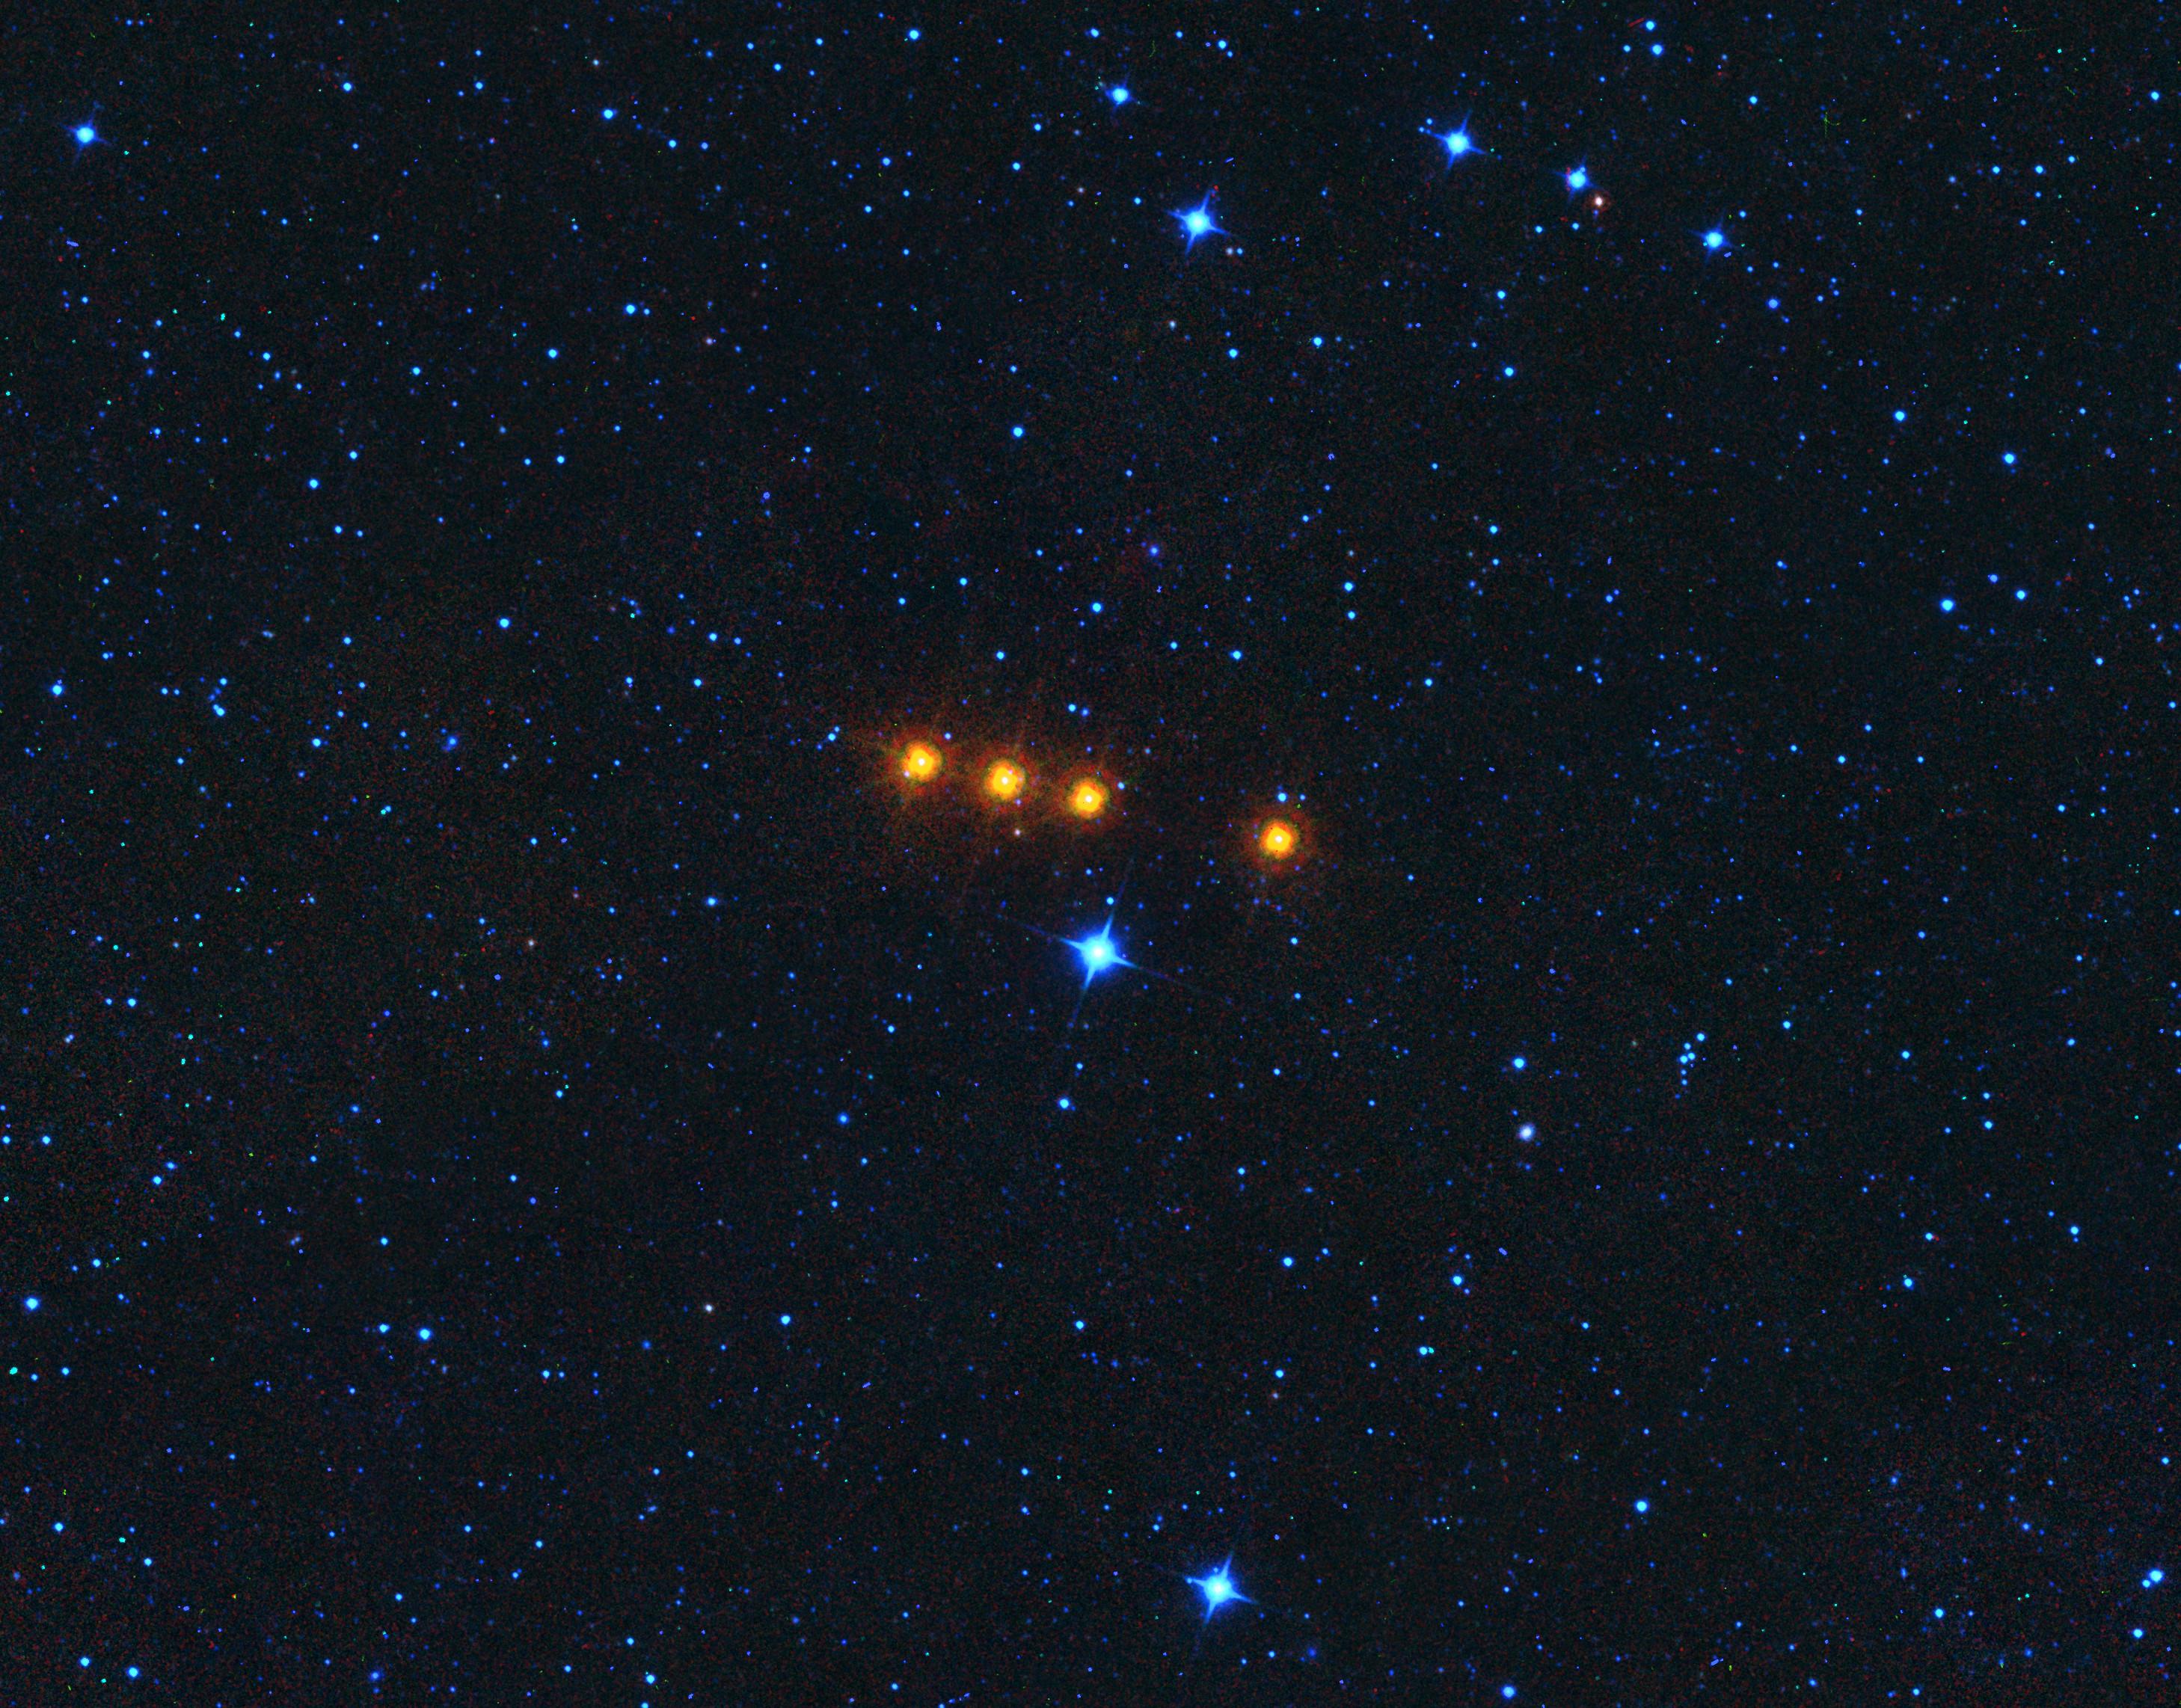 Space Image Asteroid Euphrosyne As Seen By Wise